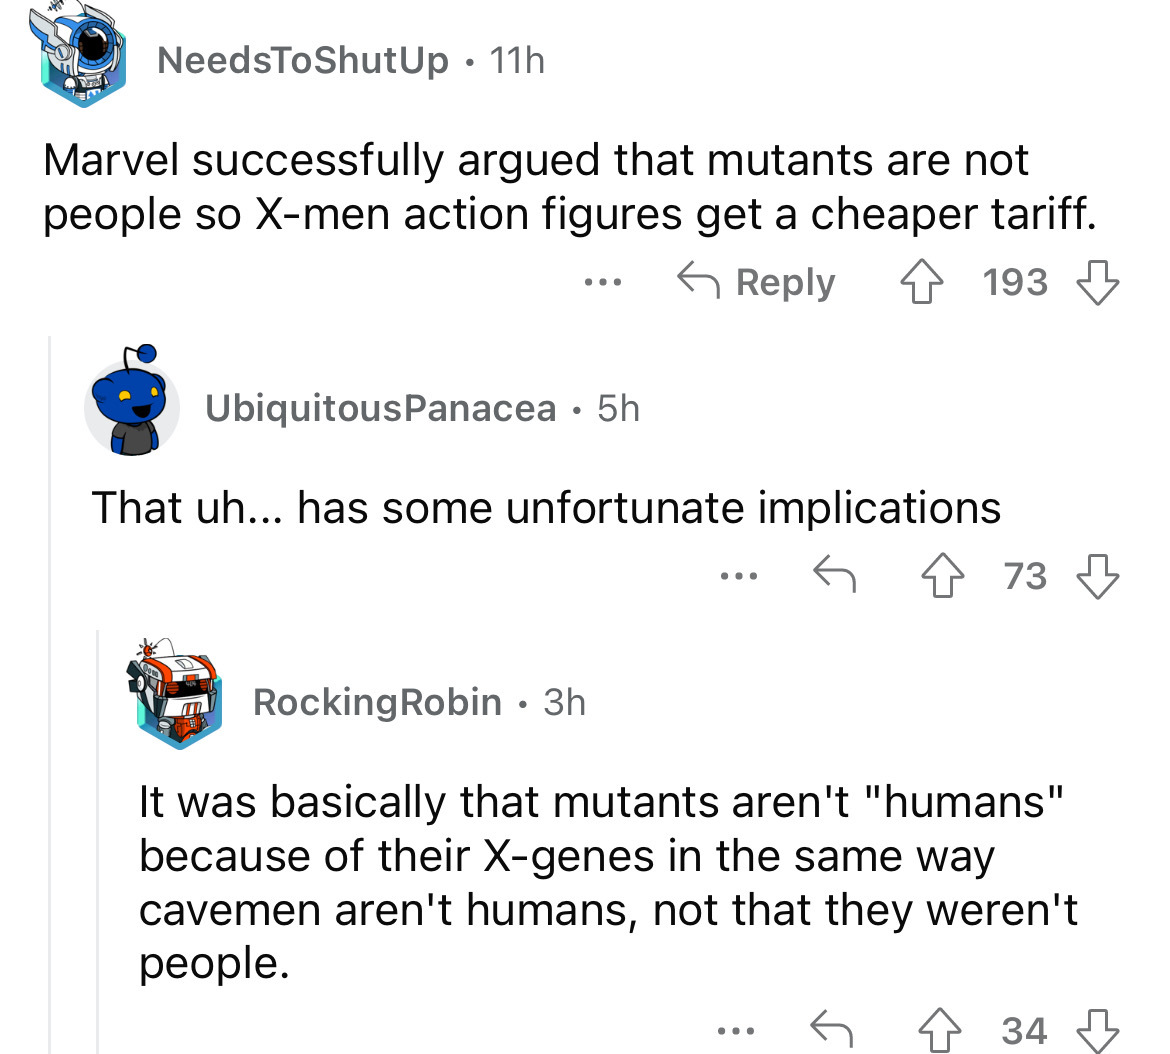 screenshot - NeedsToShutUp 11h . Marvel successfully argued that mutants are not people so Xmen action figures get a cheaper tariff. ... 193 UbiquitousPanacea 5h That uh... has some unfortunate implications Rocking Robin 3h . . . . 73 It was basically tha